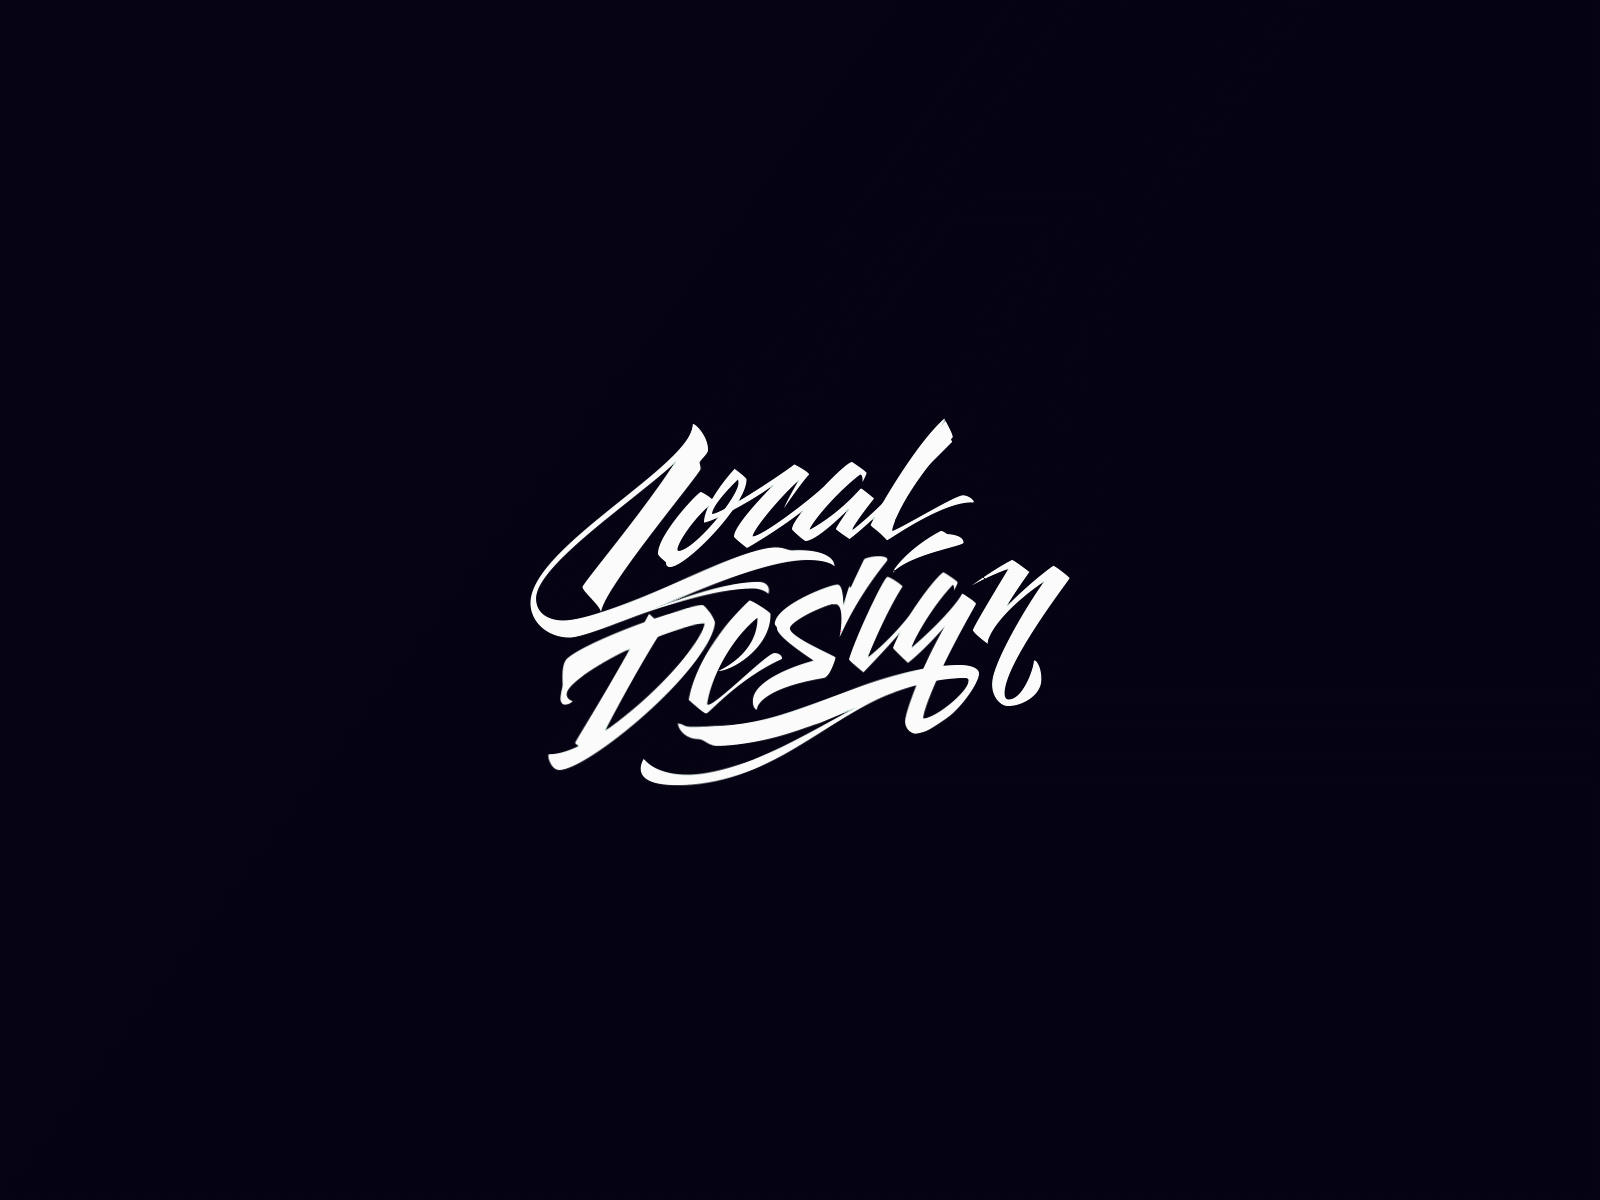 Animated lettering